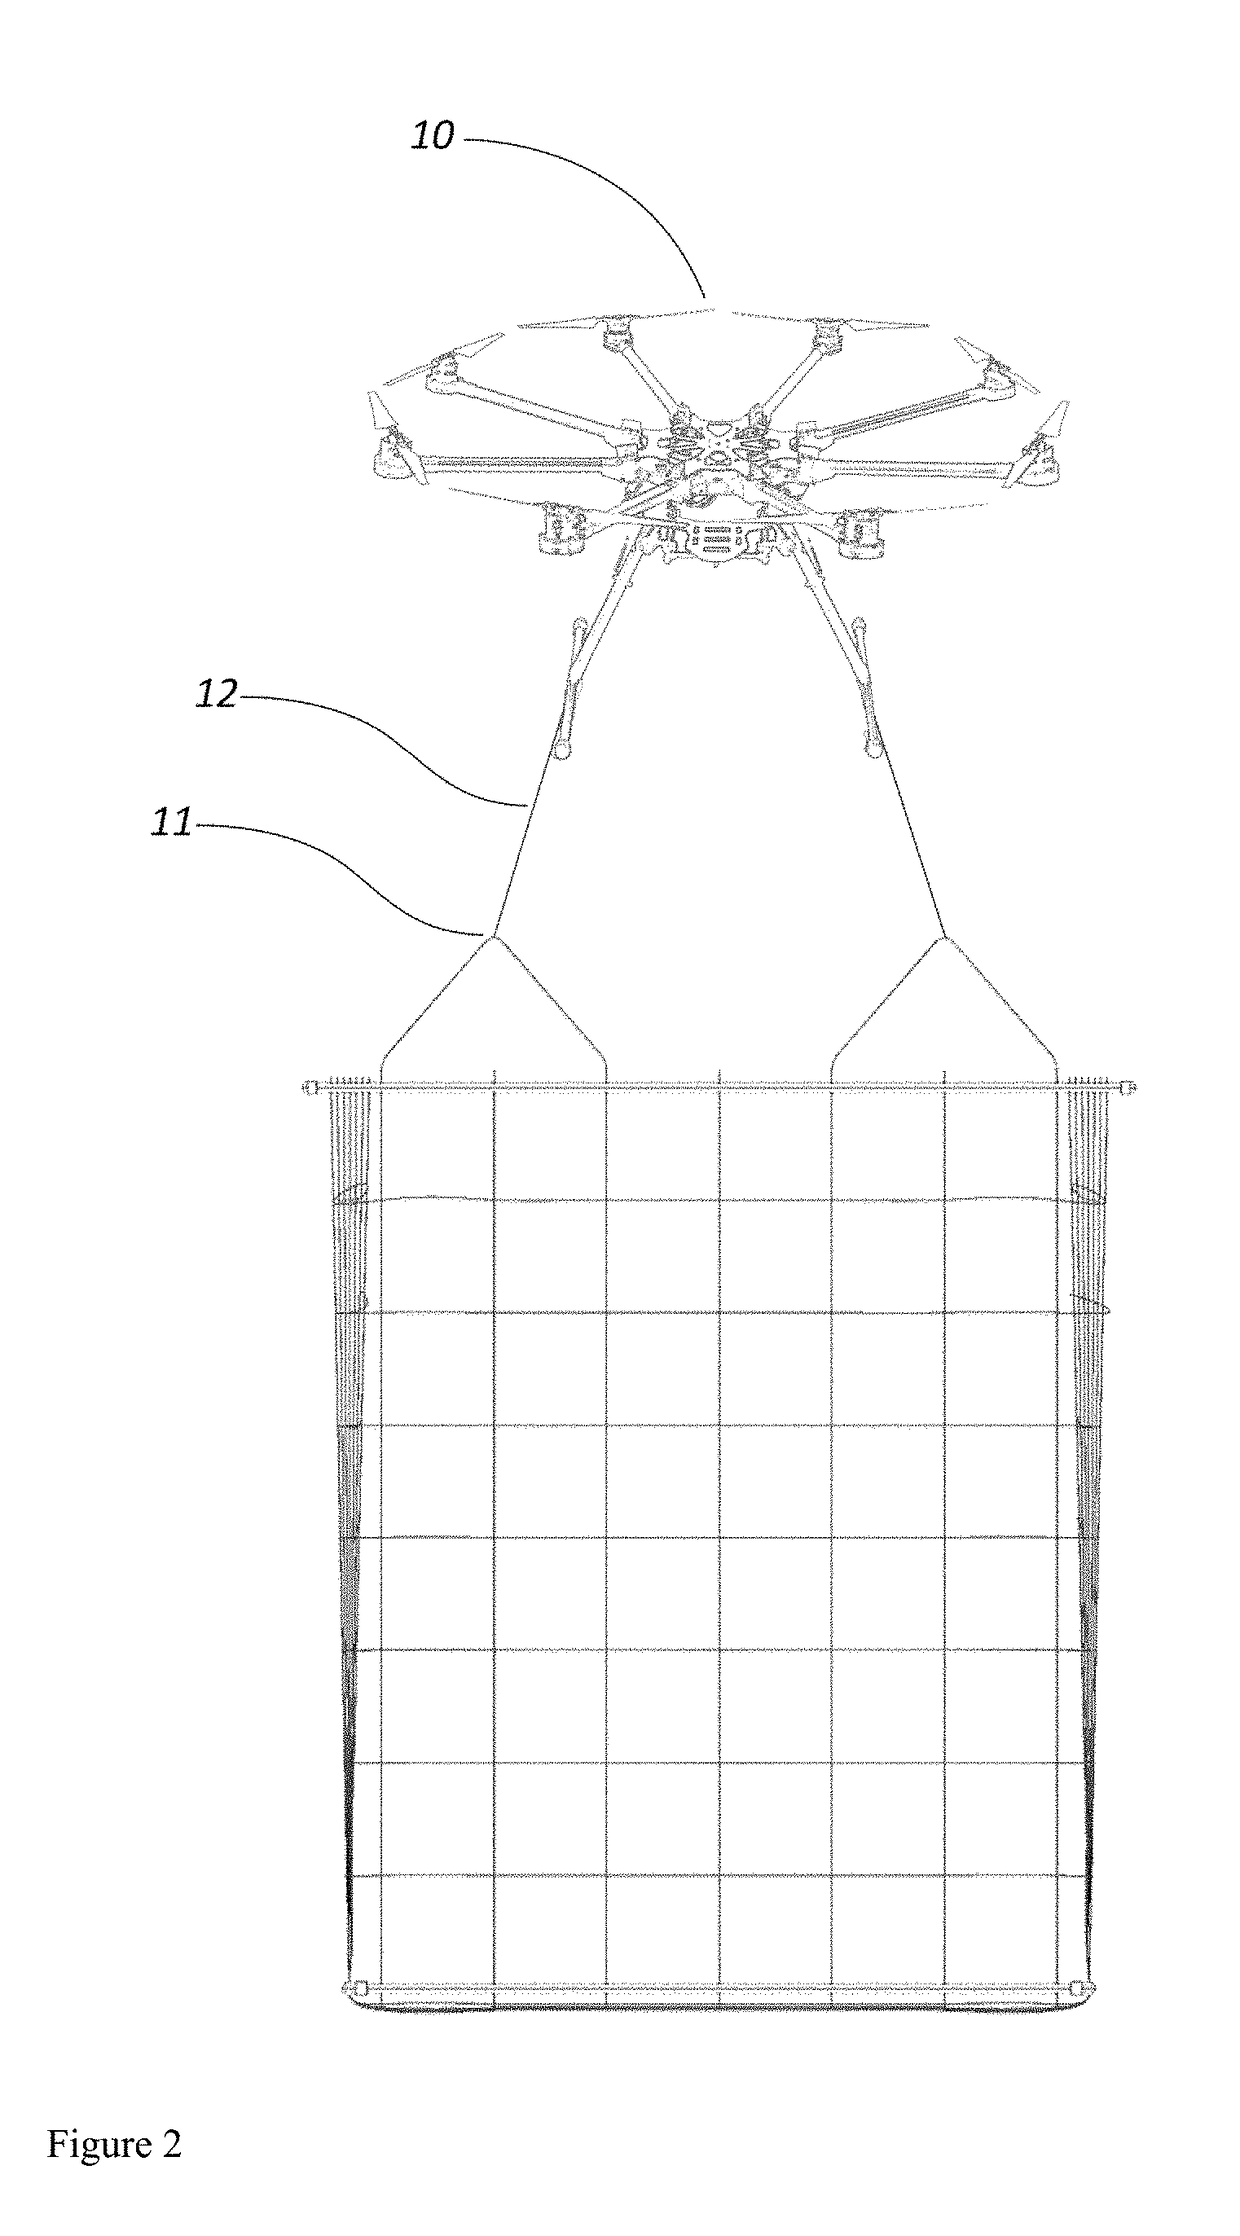 Kinetic unmanned aerial vehicle flight disruption and disabling device, system and associated methods